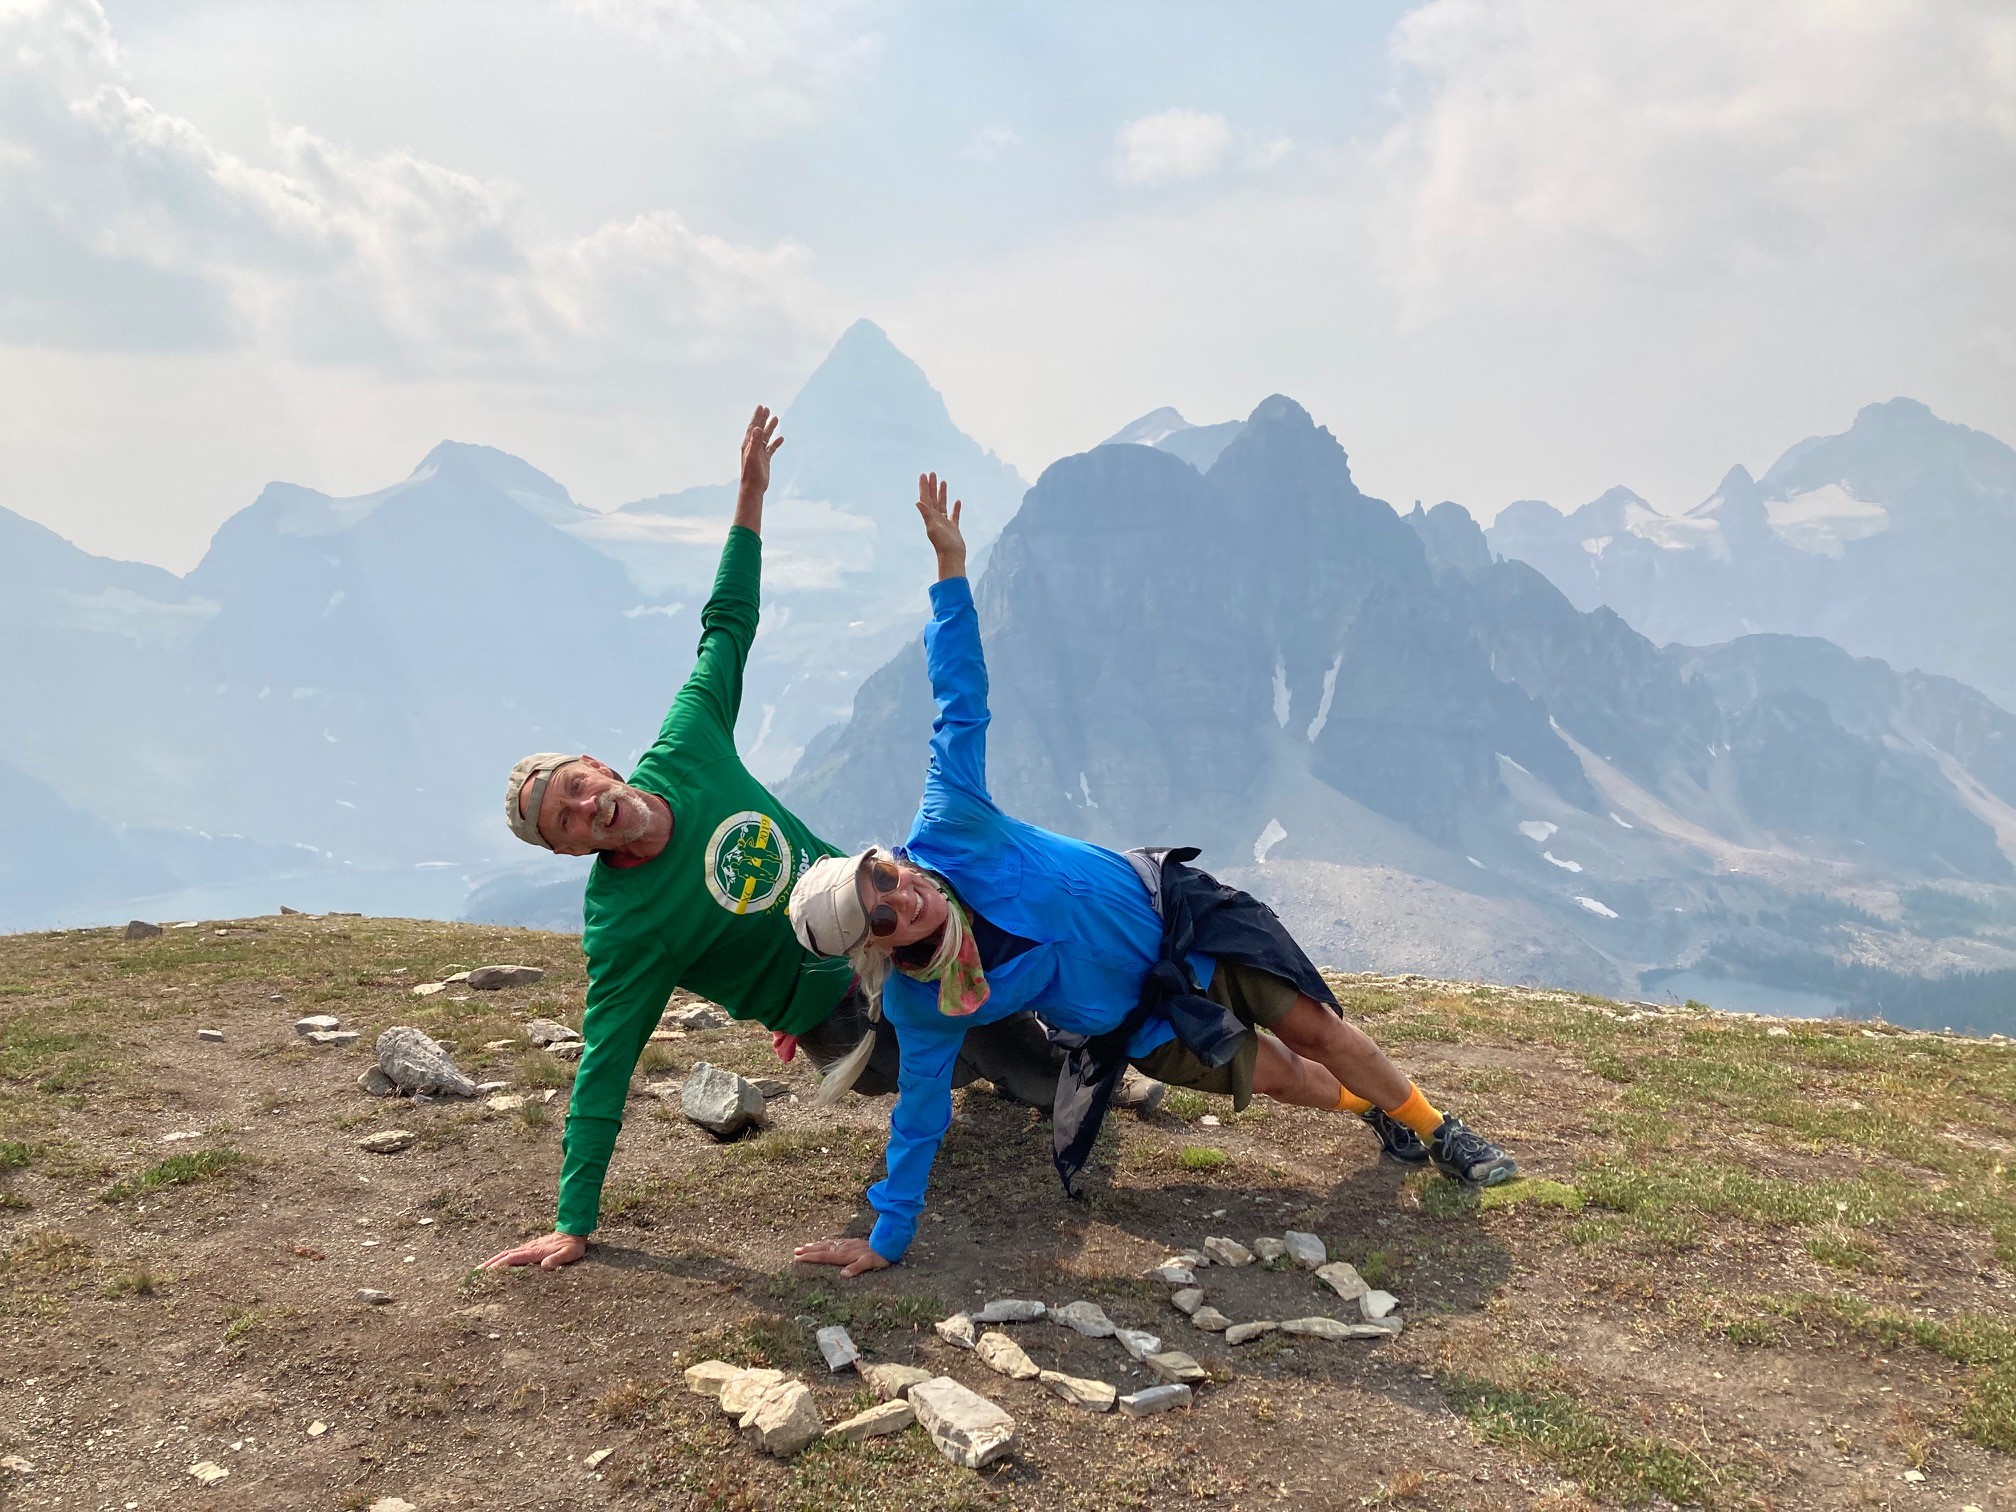 Man and woman on mountain top wearing ball caps and hiking gear, doing side push ups.